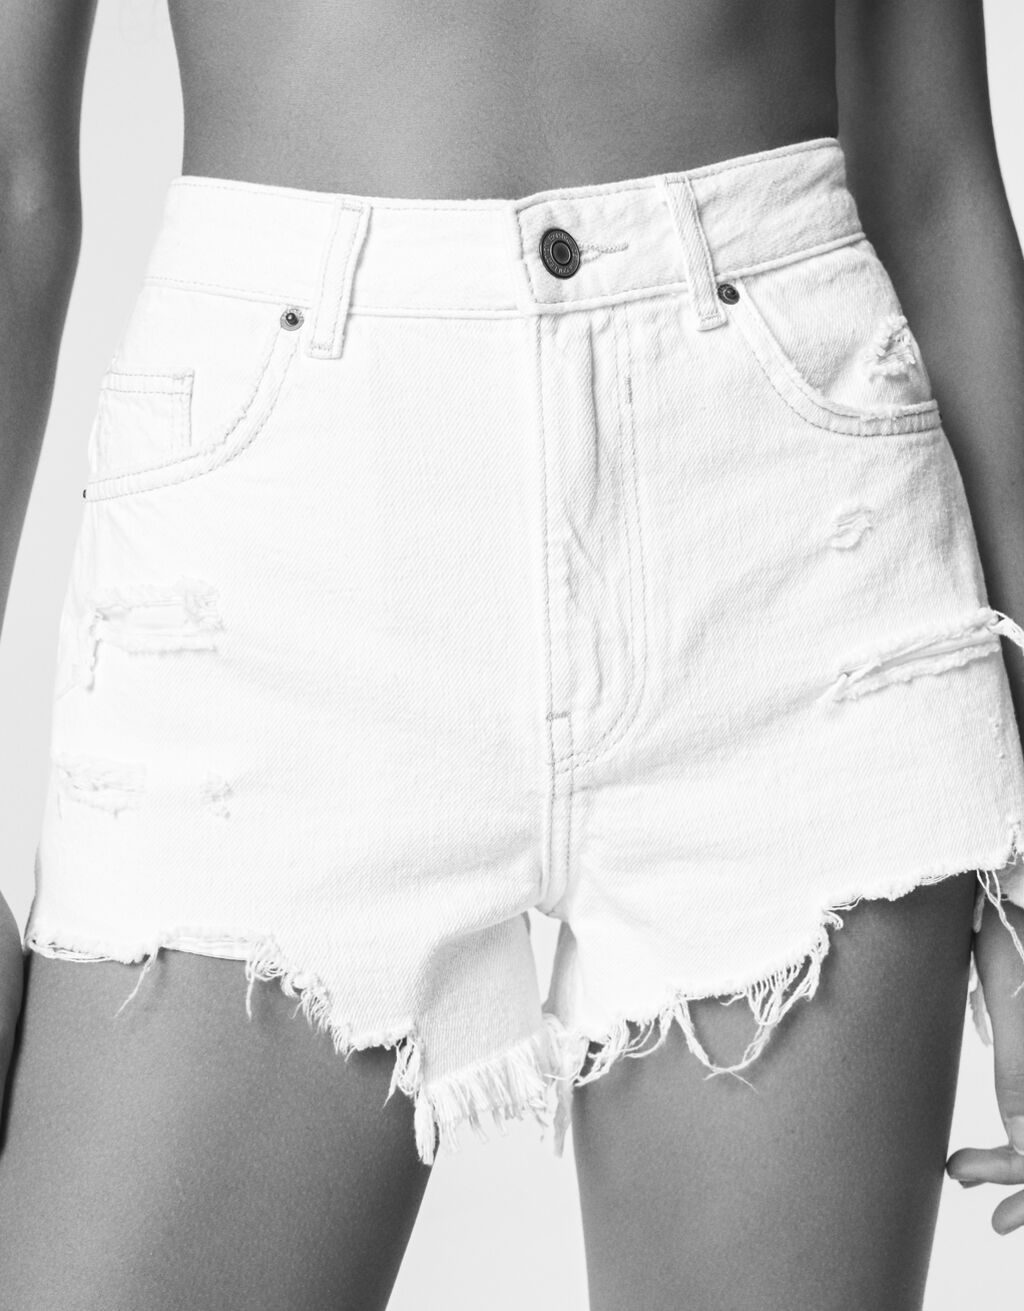 Vintage denim shorts with rips